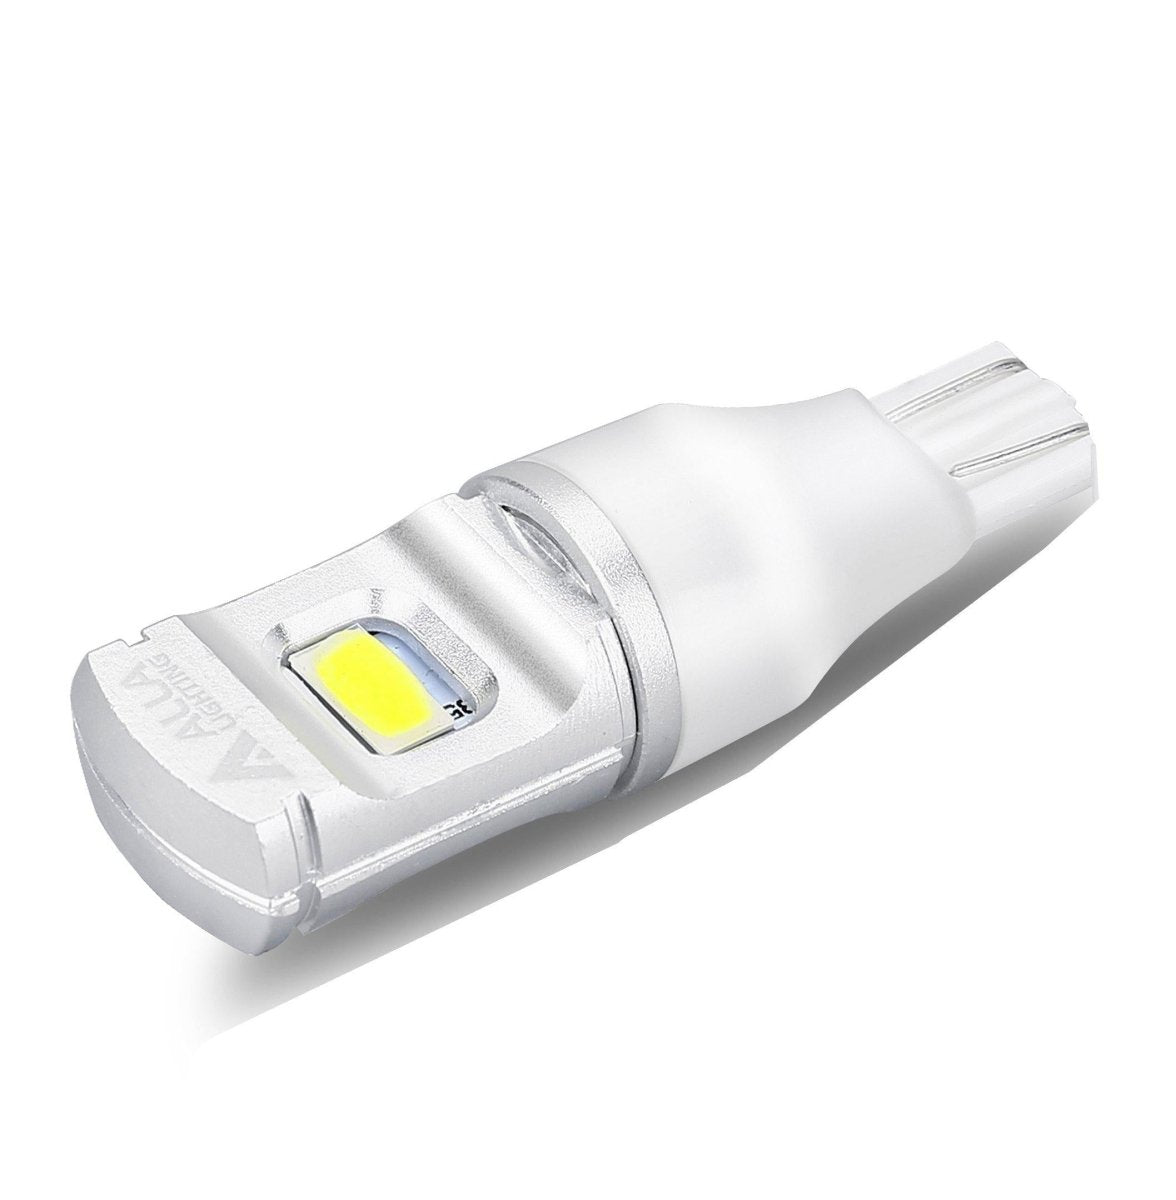 Super Bright T15 912 921 LED Bulbs, Best Car Reverse Light Replacement